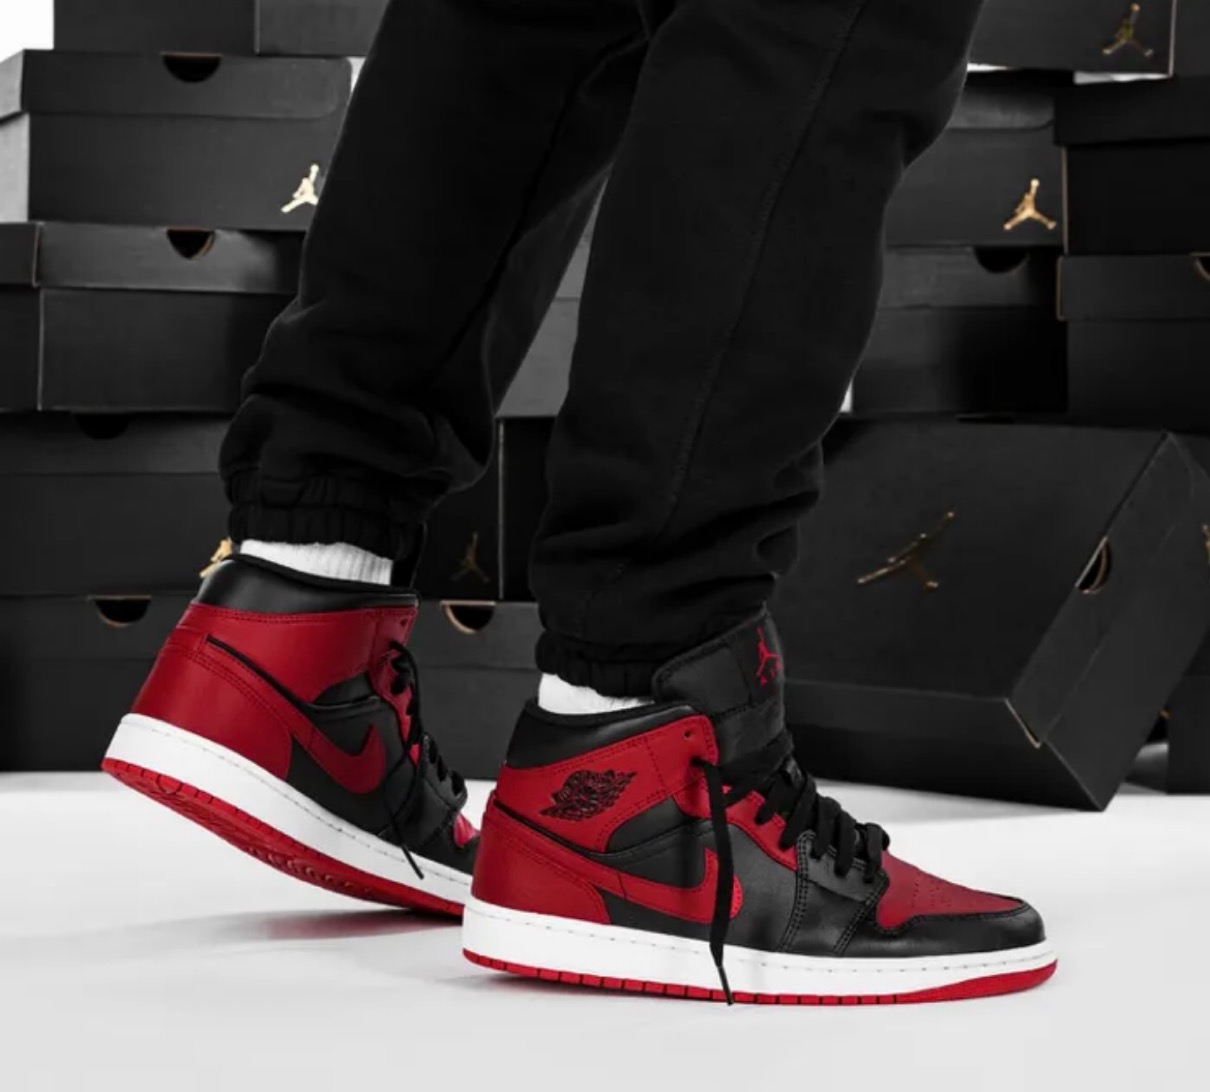 Nike】Air Jordan 1 Mid “Bred”が国内3月21日に再販予定 | UP TO DATE